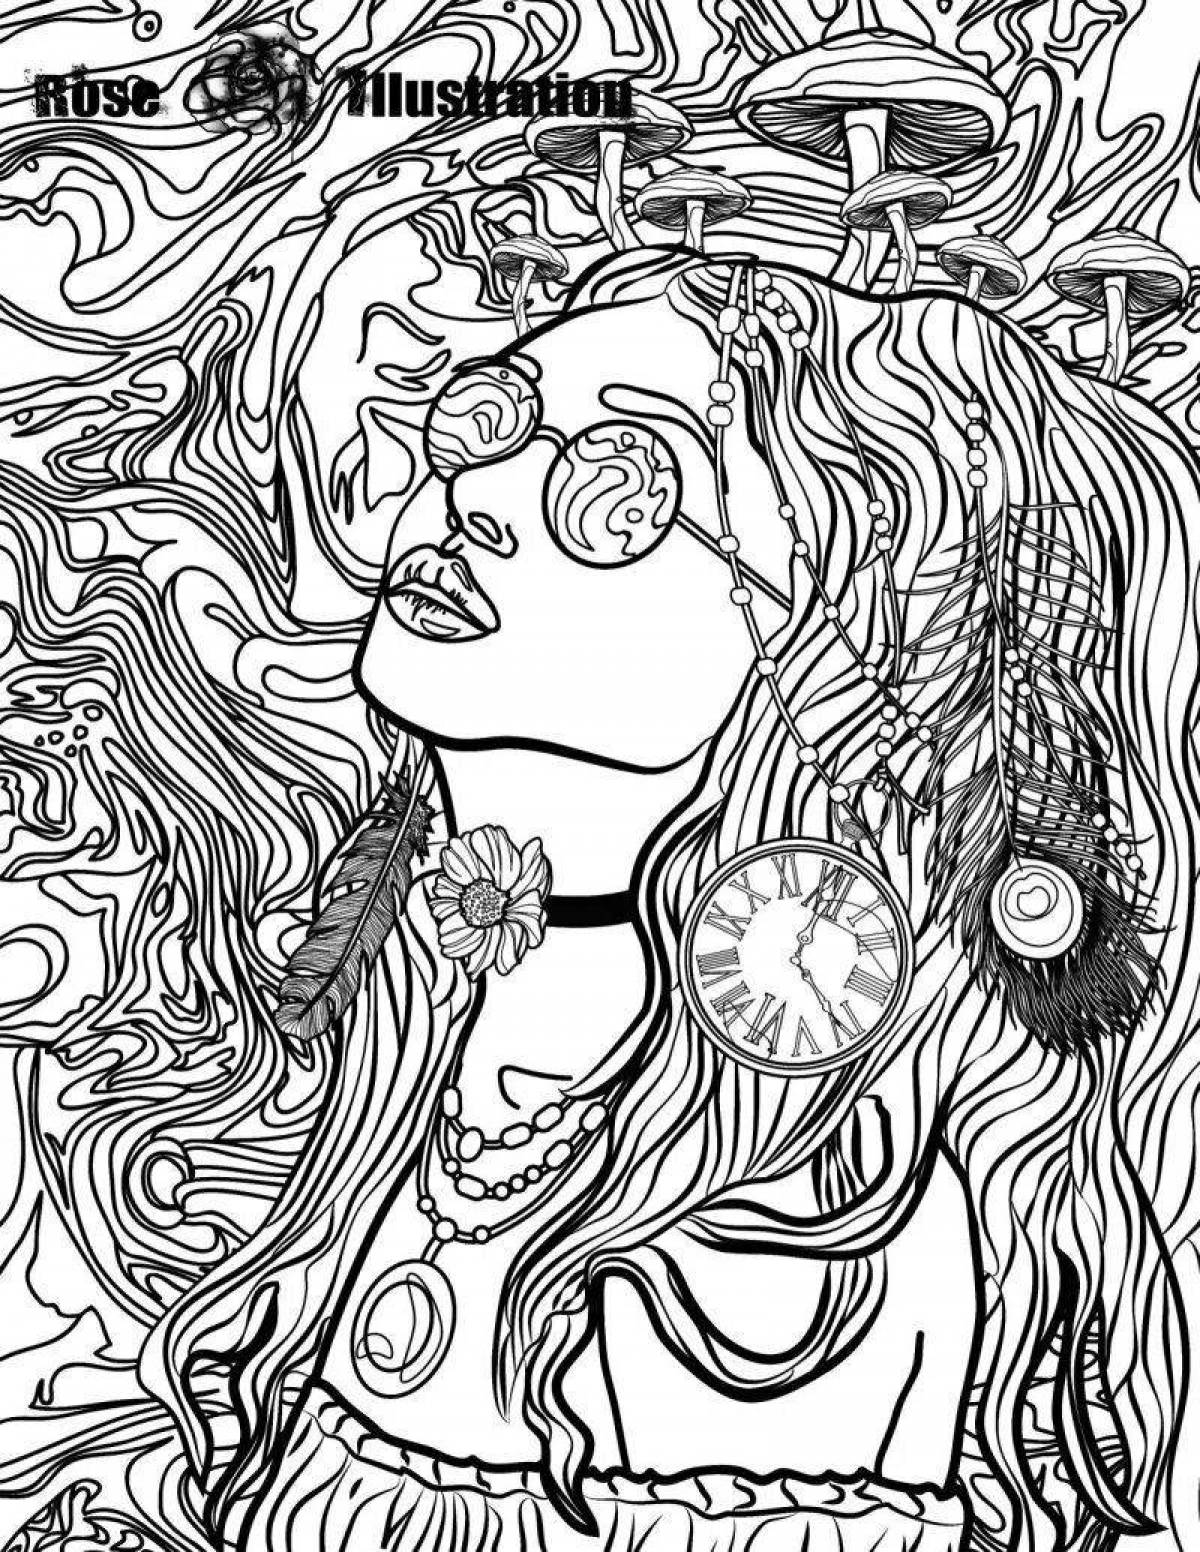 Charming psychedelic coloring book